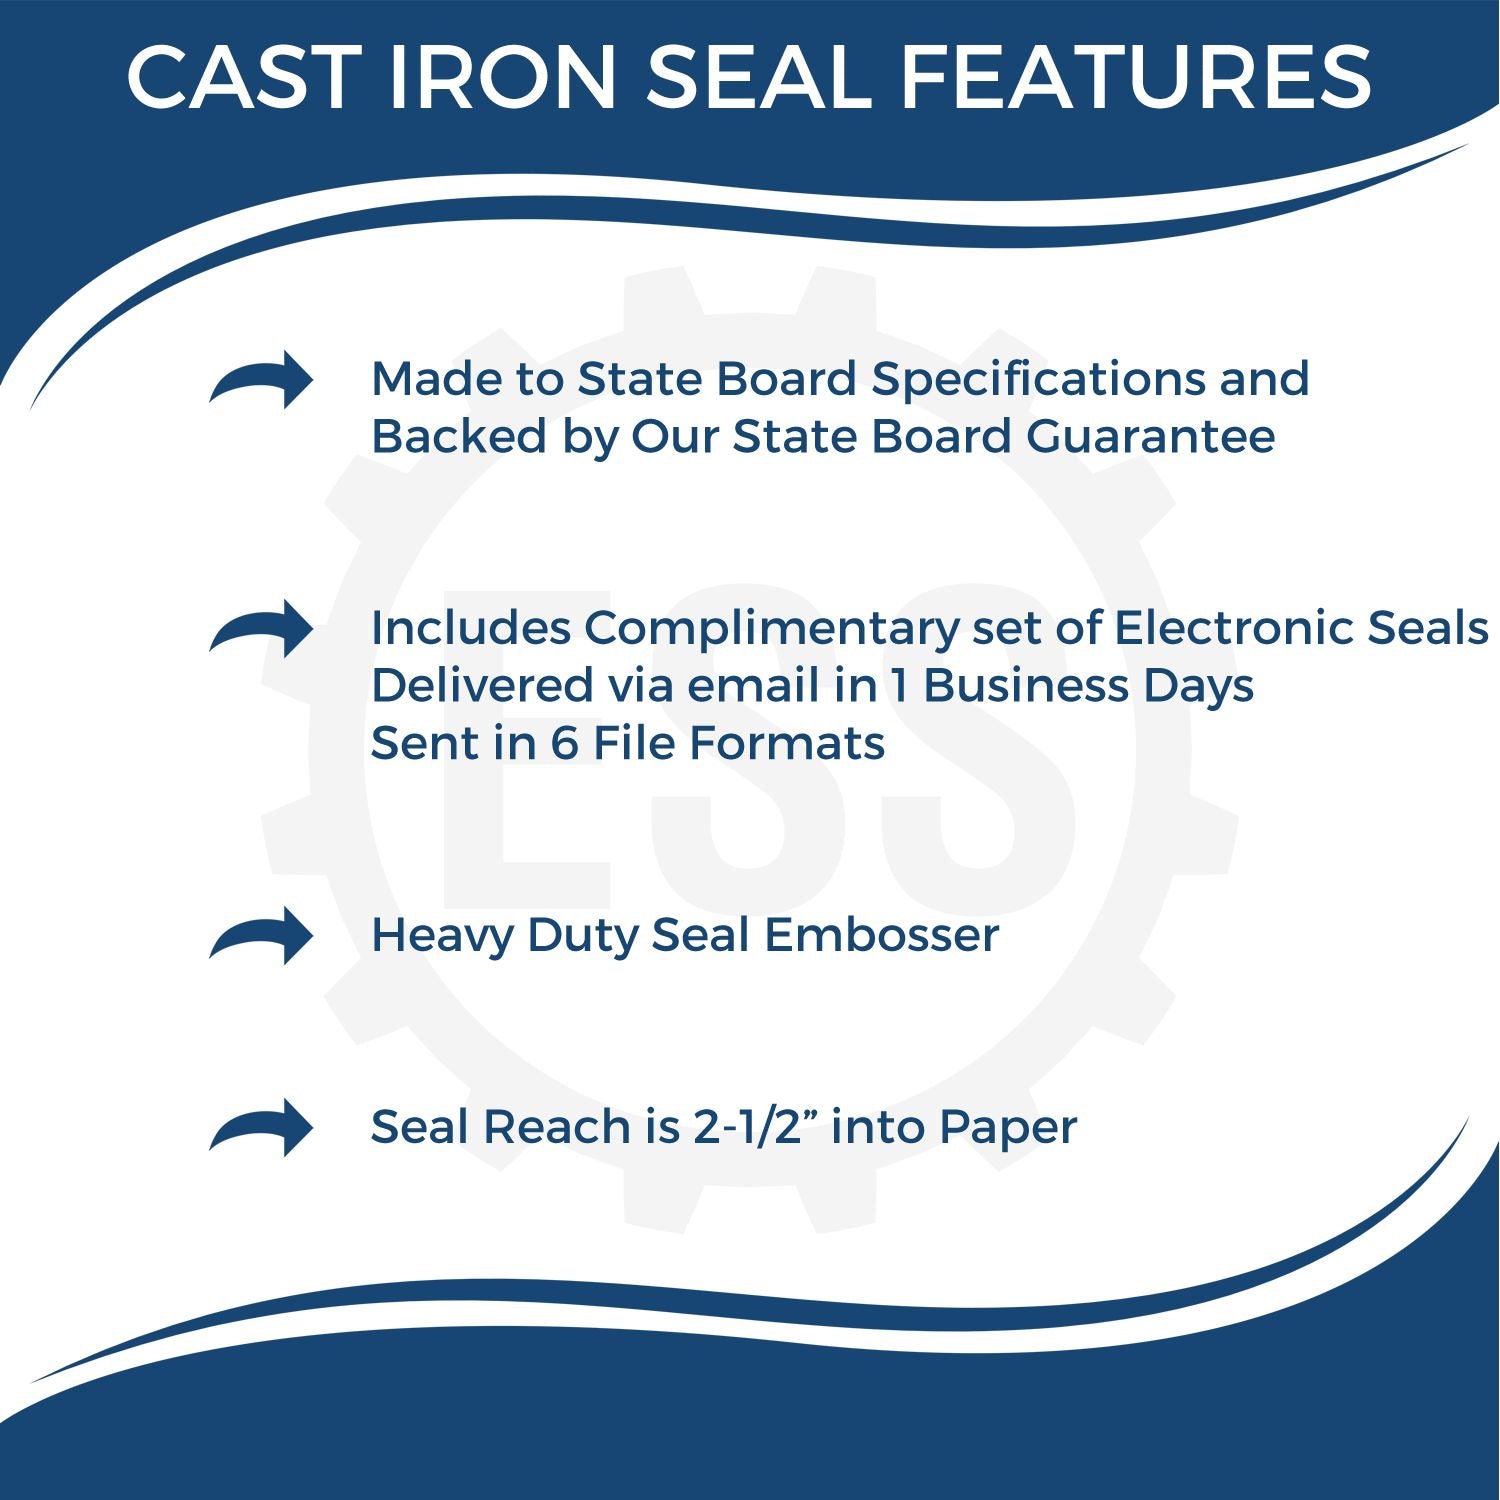 The main image for the Heavy Duty Cast Iron Illinois Engineer Seal Embosser depicting a sample of the imprint and electronic files